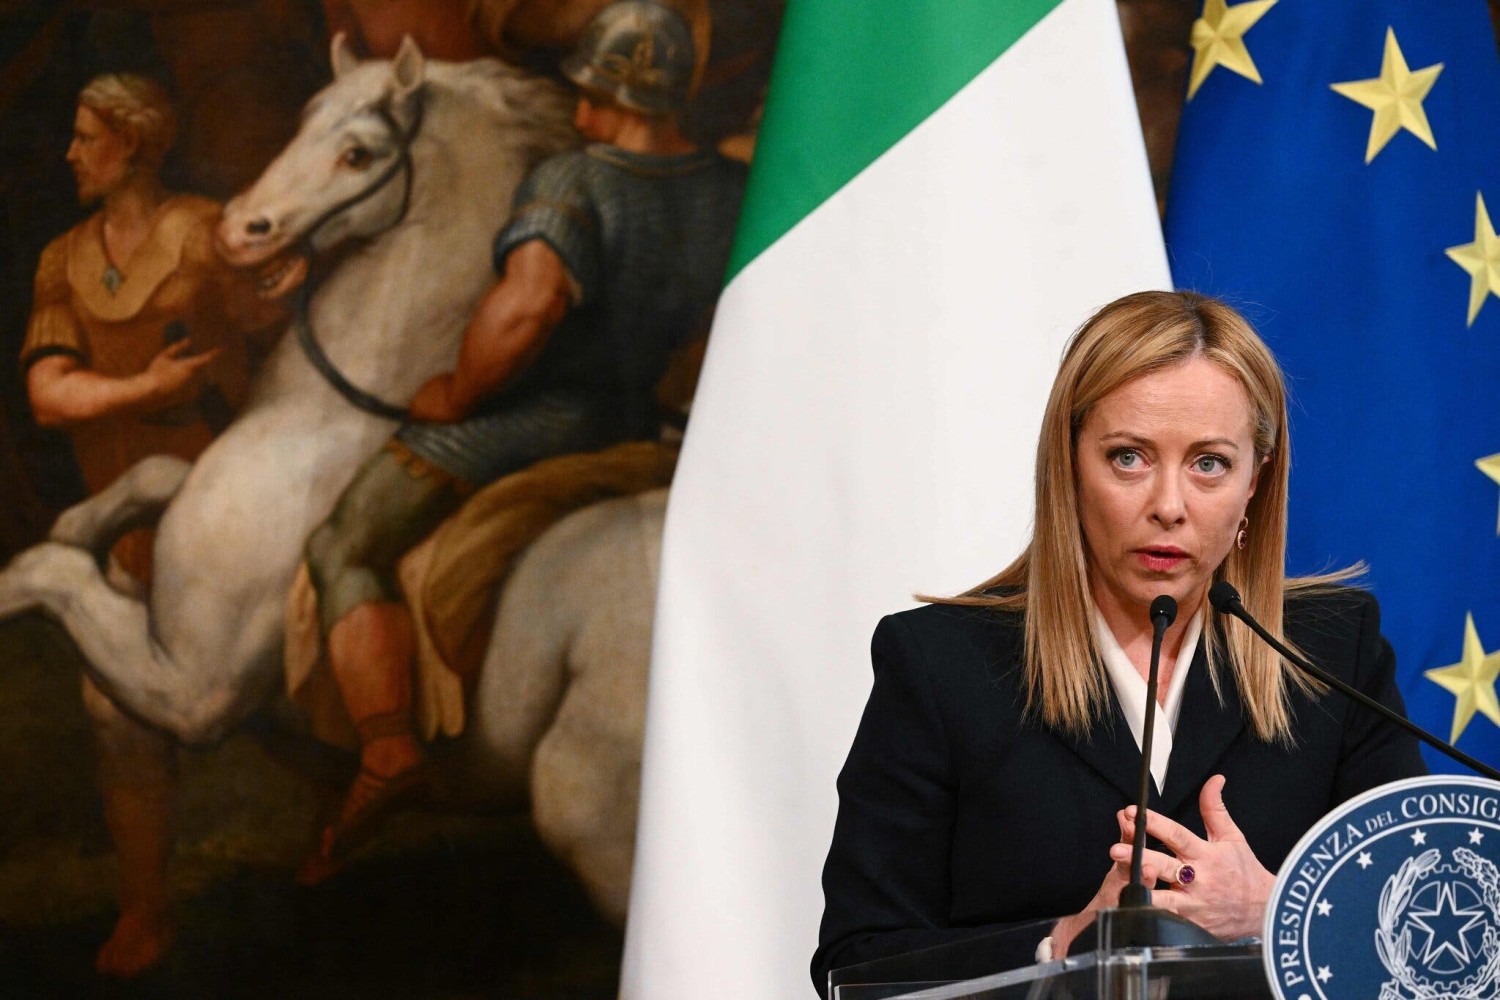 Prime Minister Giorgia Meloni of Italy at a news conference with NATO’s general secretary in Rome in November.Credit...Vincenzo Pinto/Agence France-Presse — Getty Images